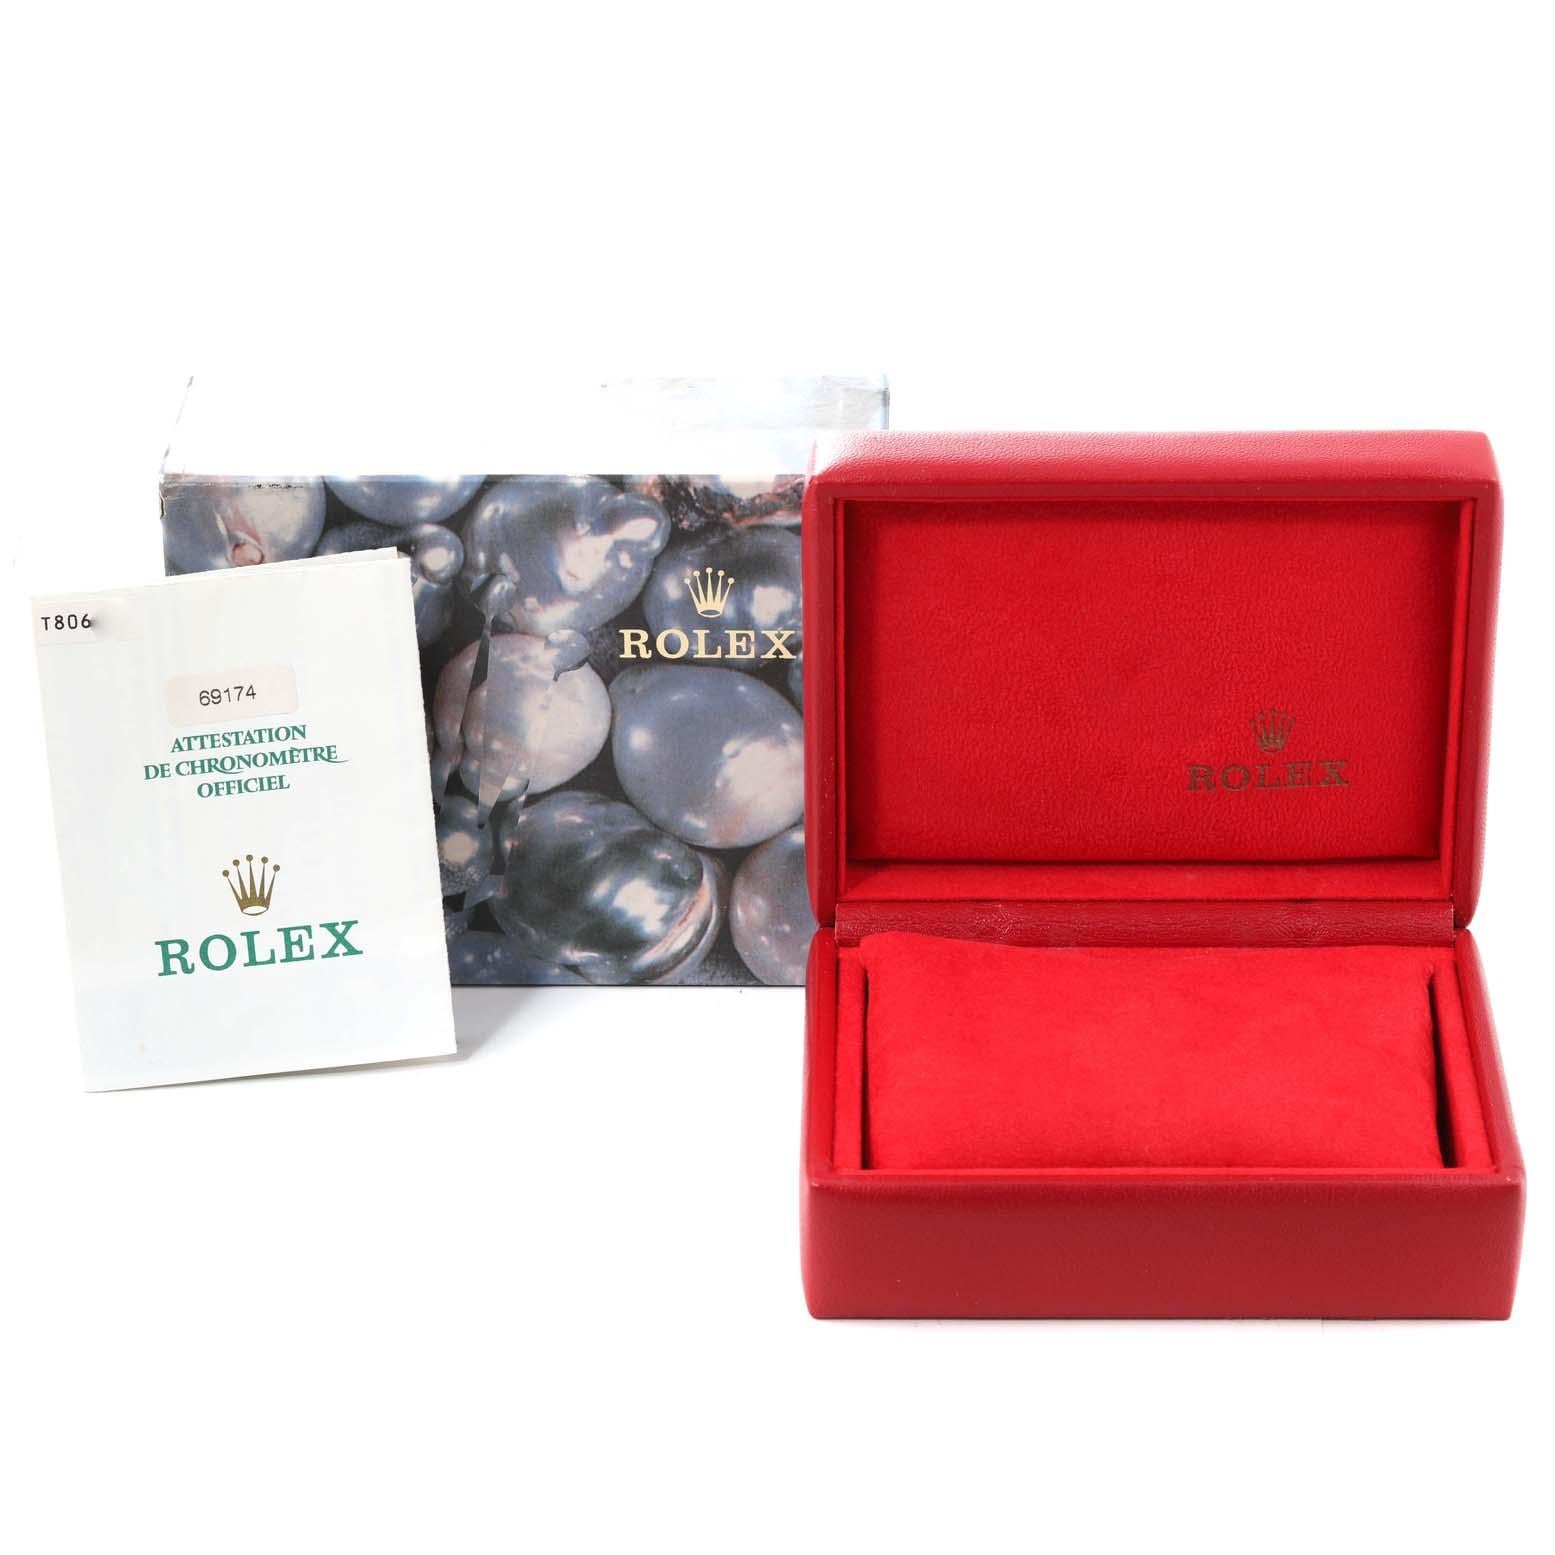 Rolex Datejust Steel White Gold Salmon Dial Ladies Watch 69174 Box Papers 8